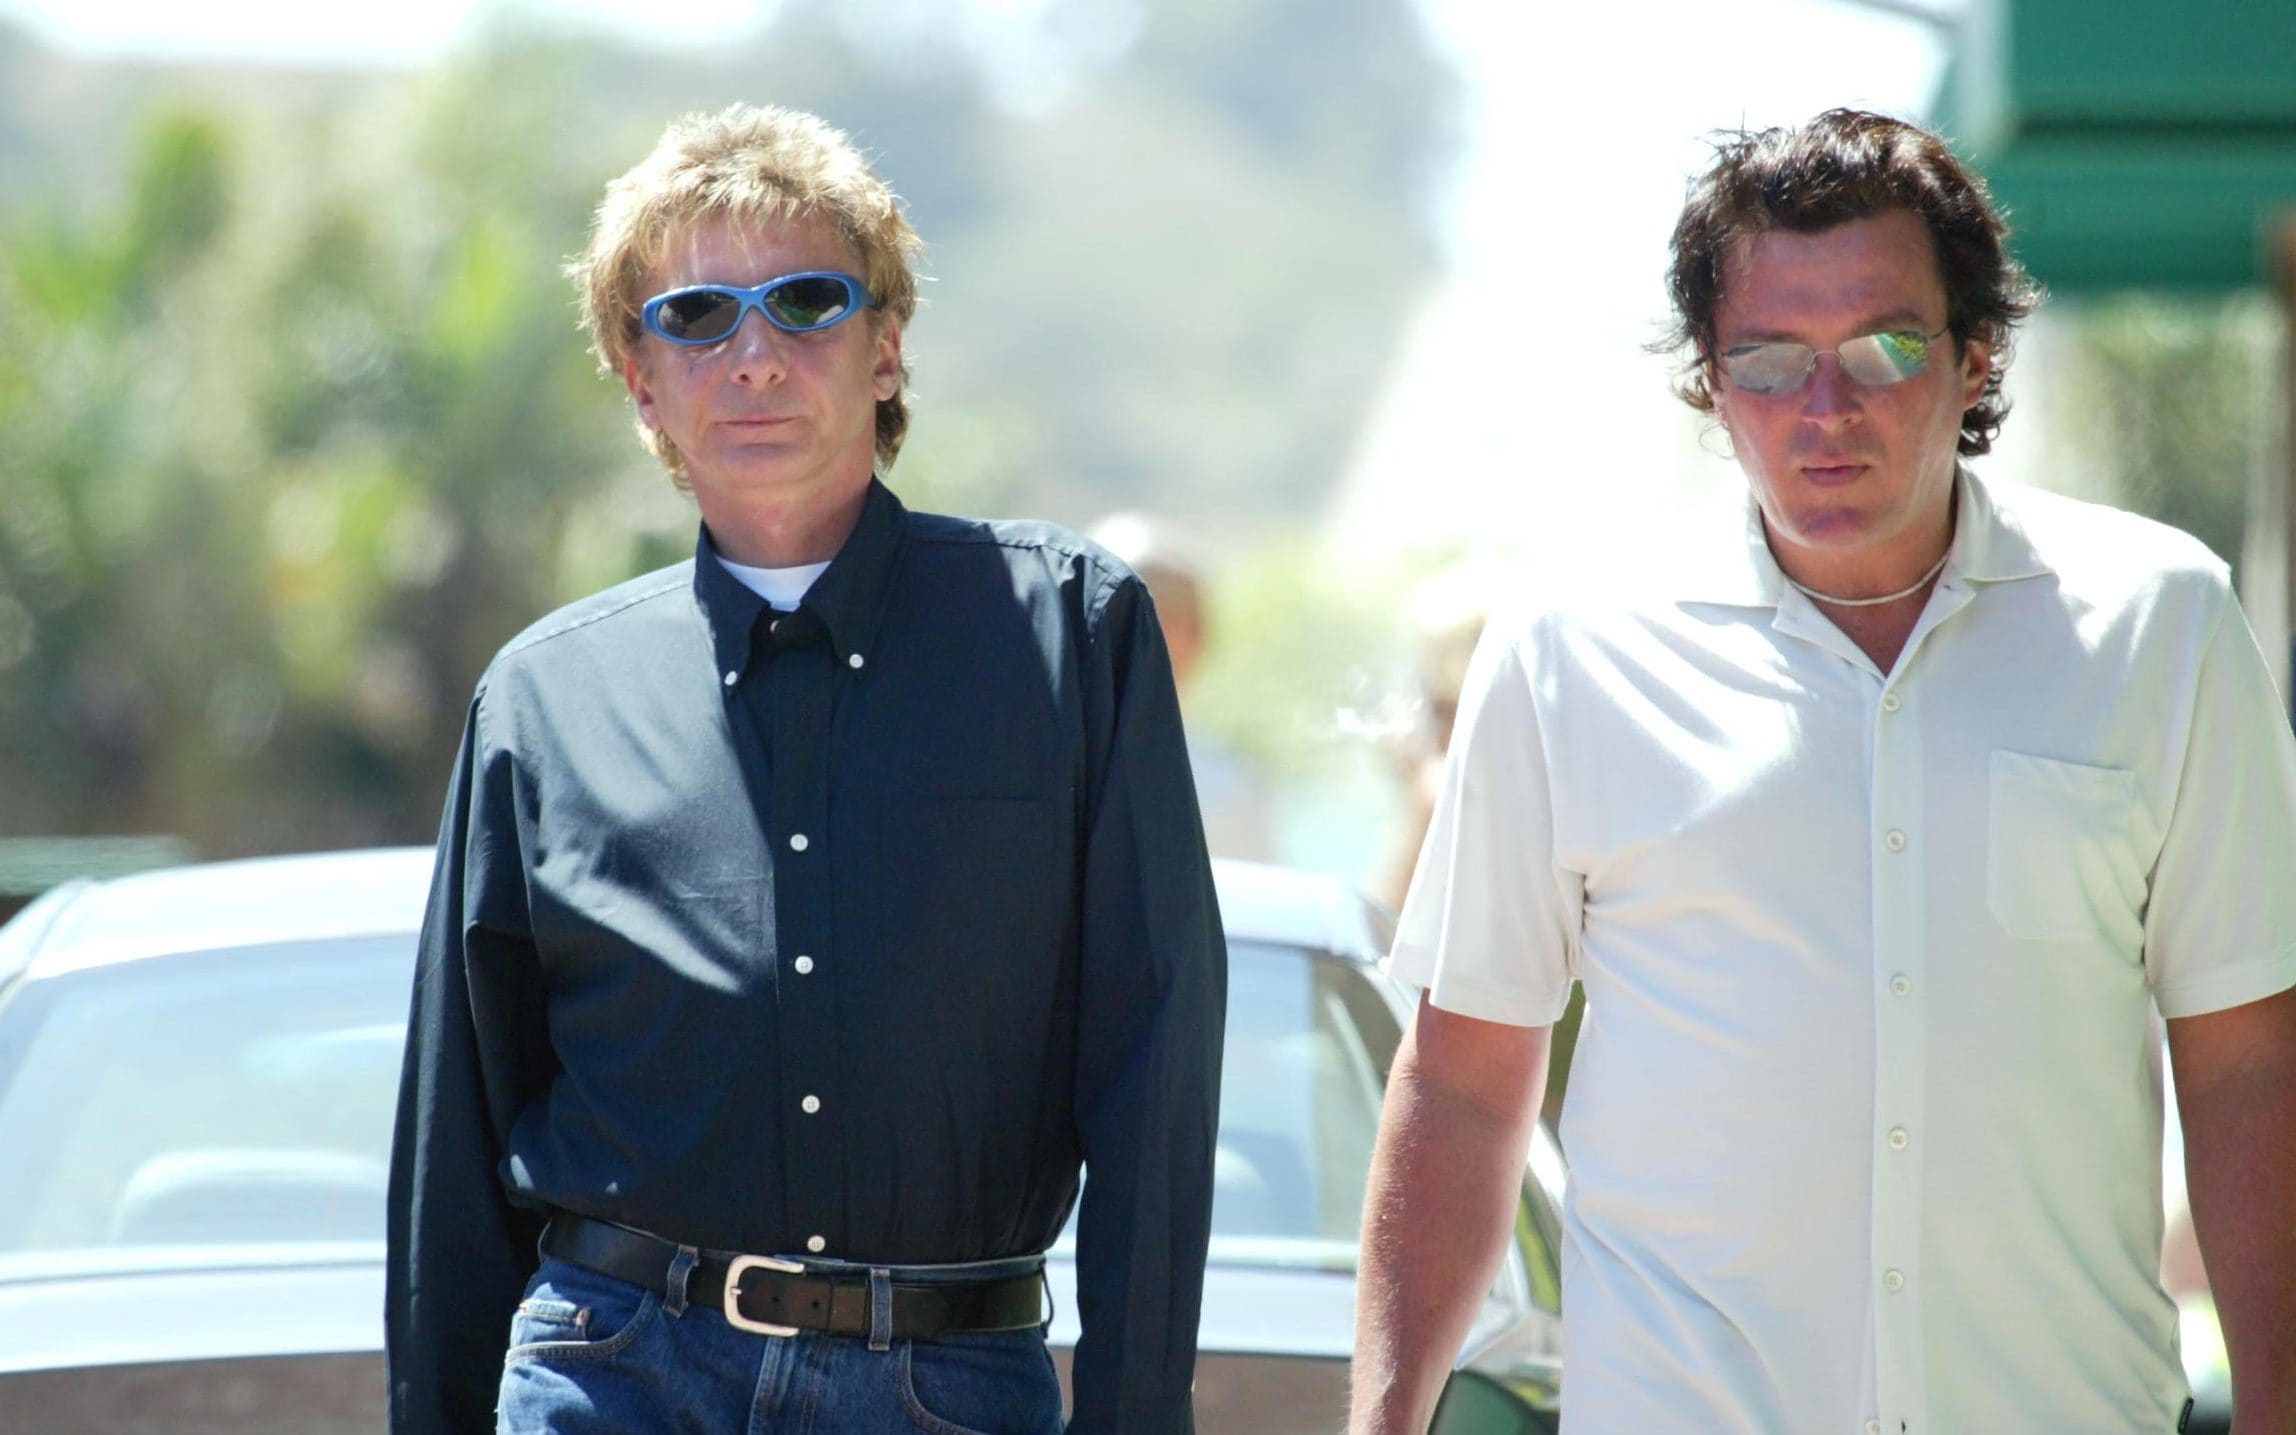 Barry Manilow comes out as gay at 73 and reveals his partner of 39 years